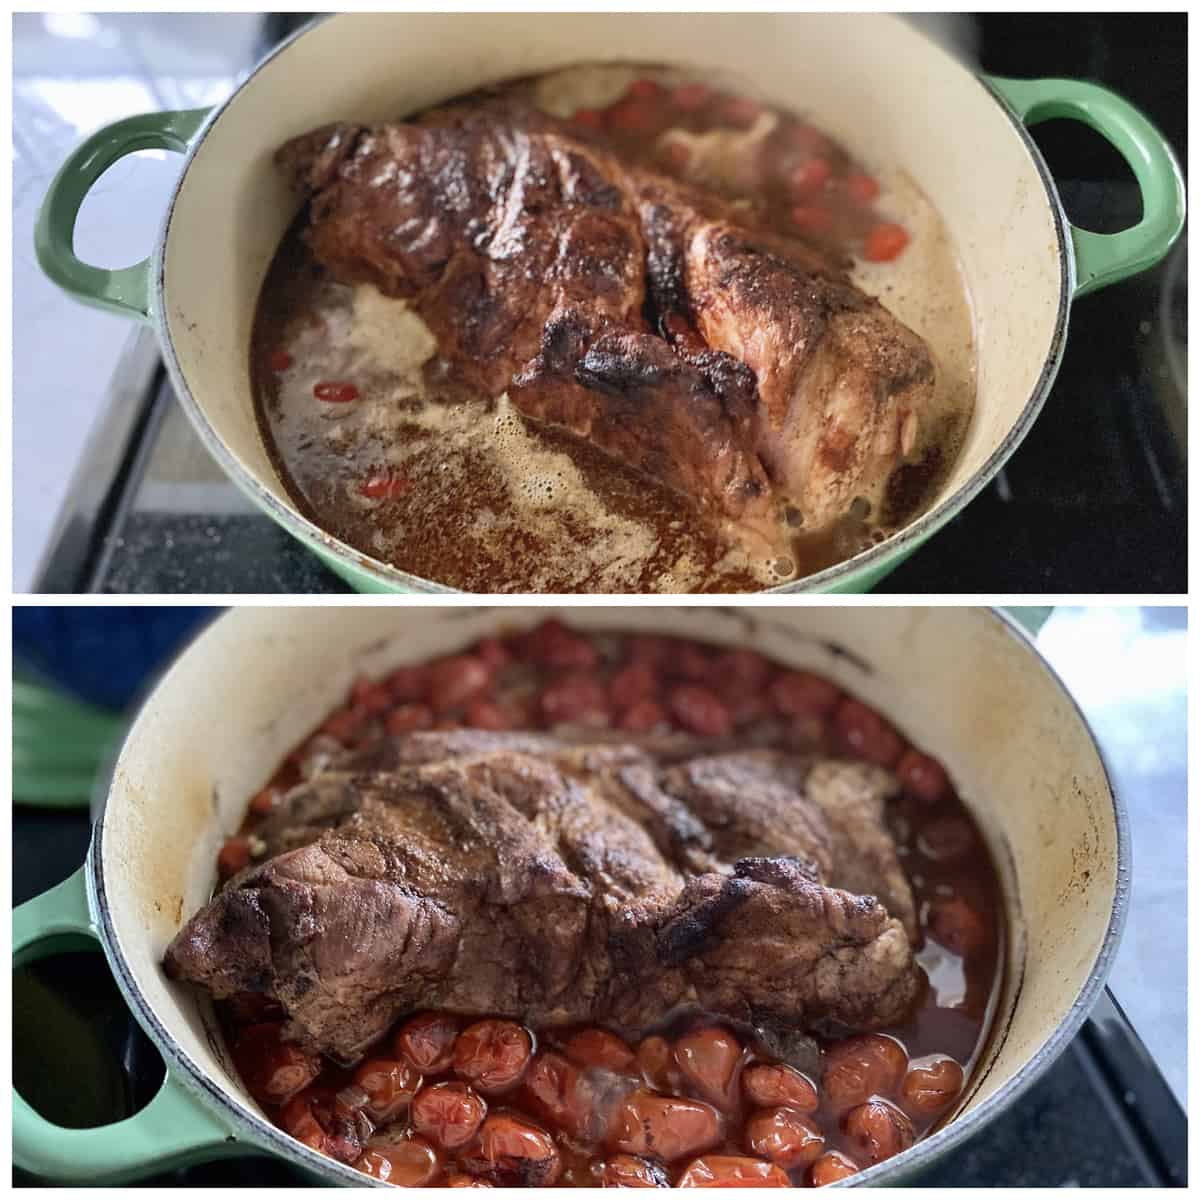 Two photos of a pork roast cooking in a green pot.